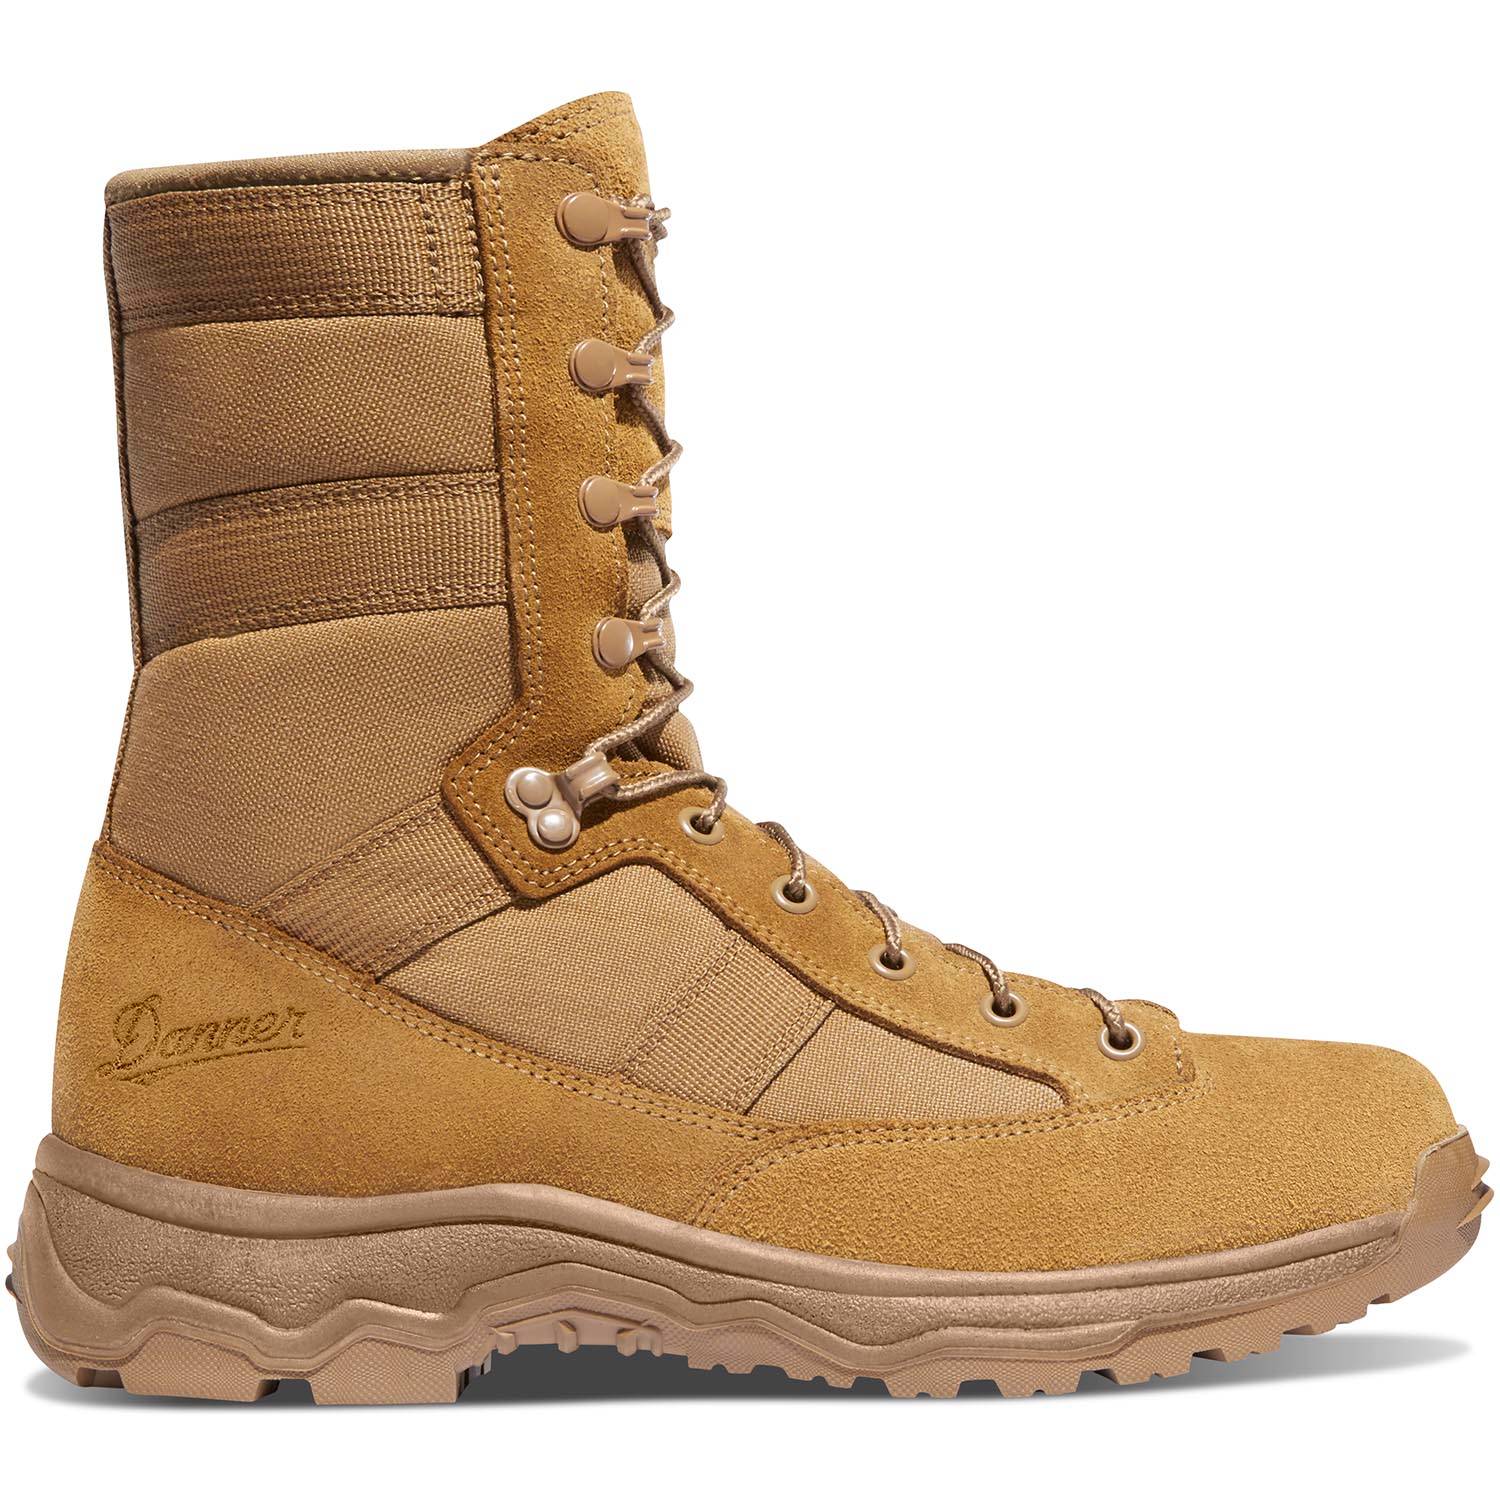 Danner Reckoning 400g Insulated GORE-TEX Boots